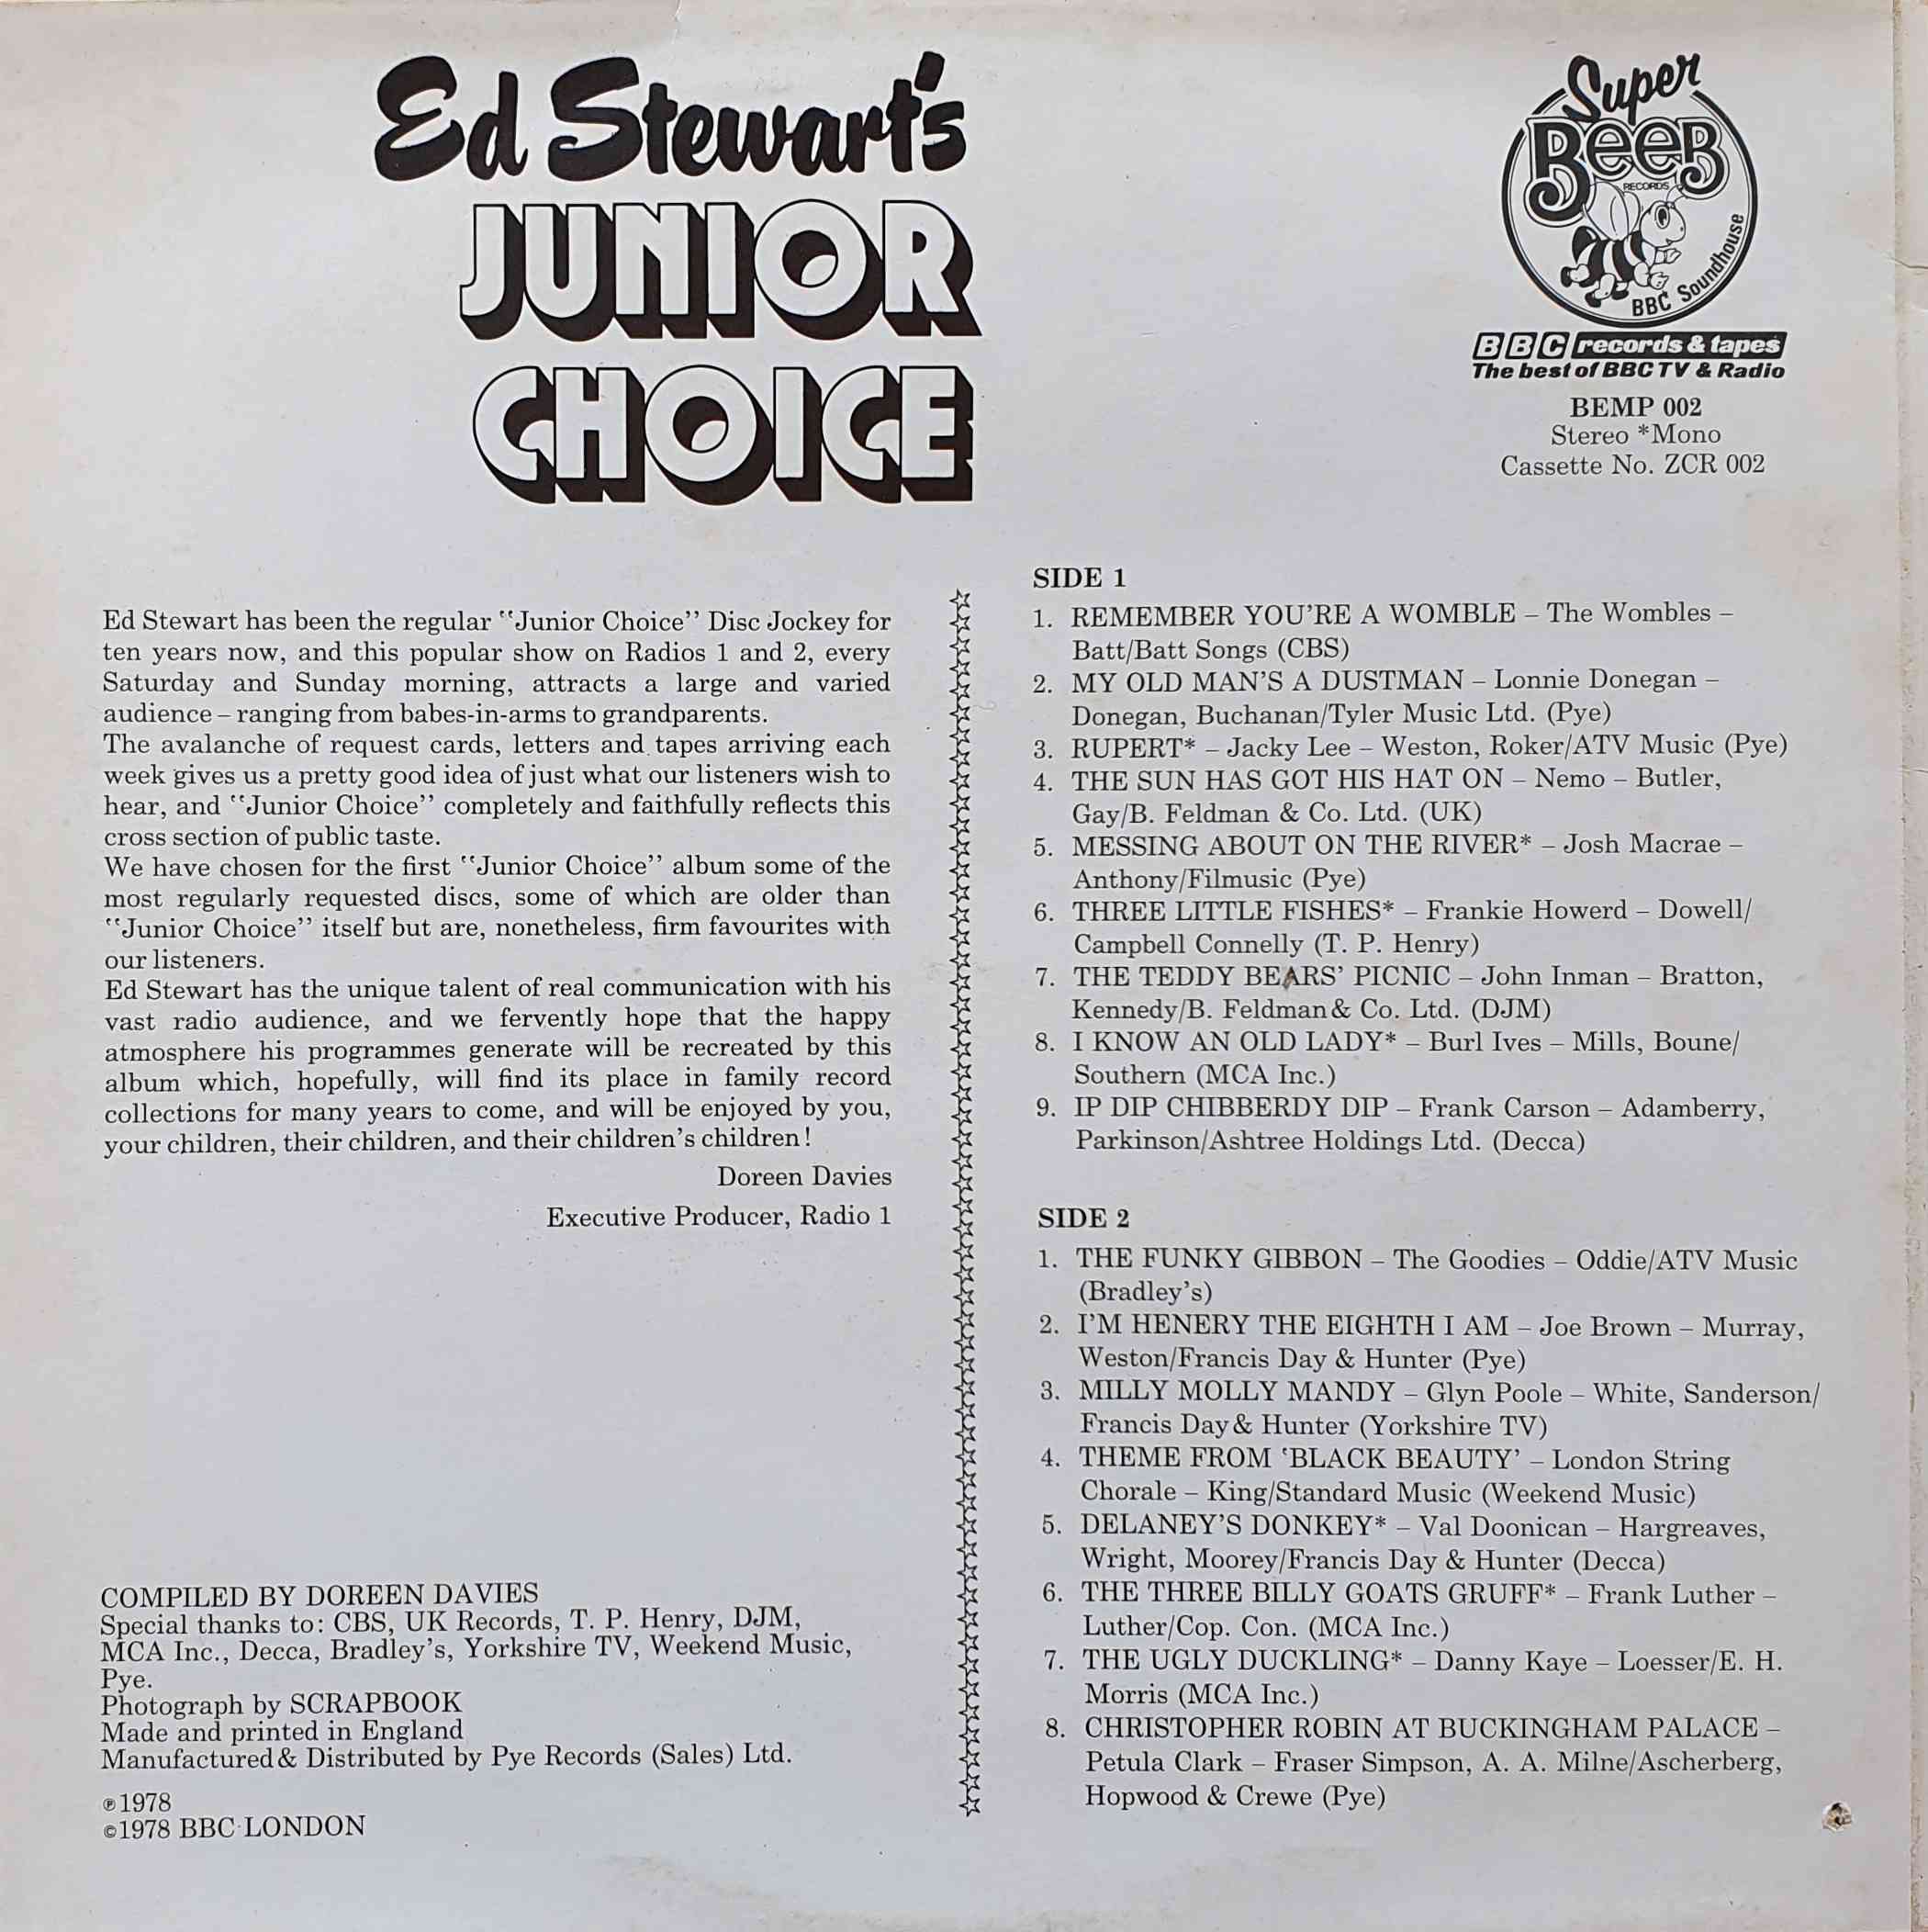 Picture of BEMP 002 Junior choice by artist Various from the BBC records and Tapes library